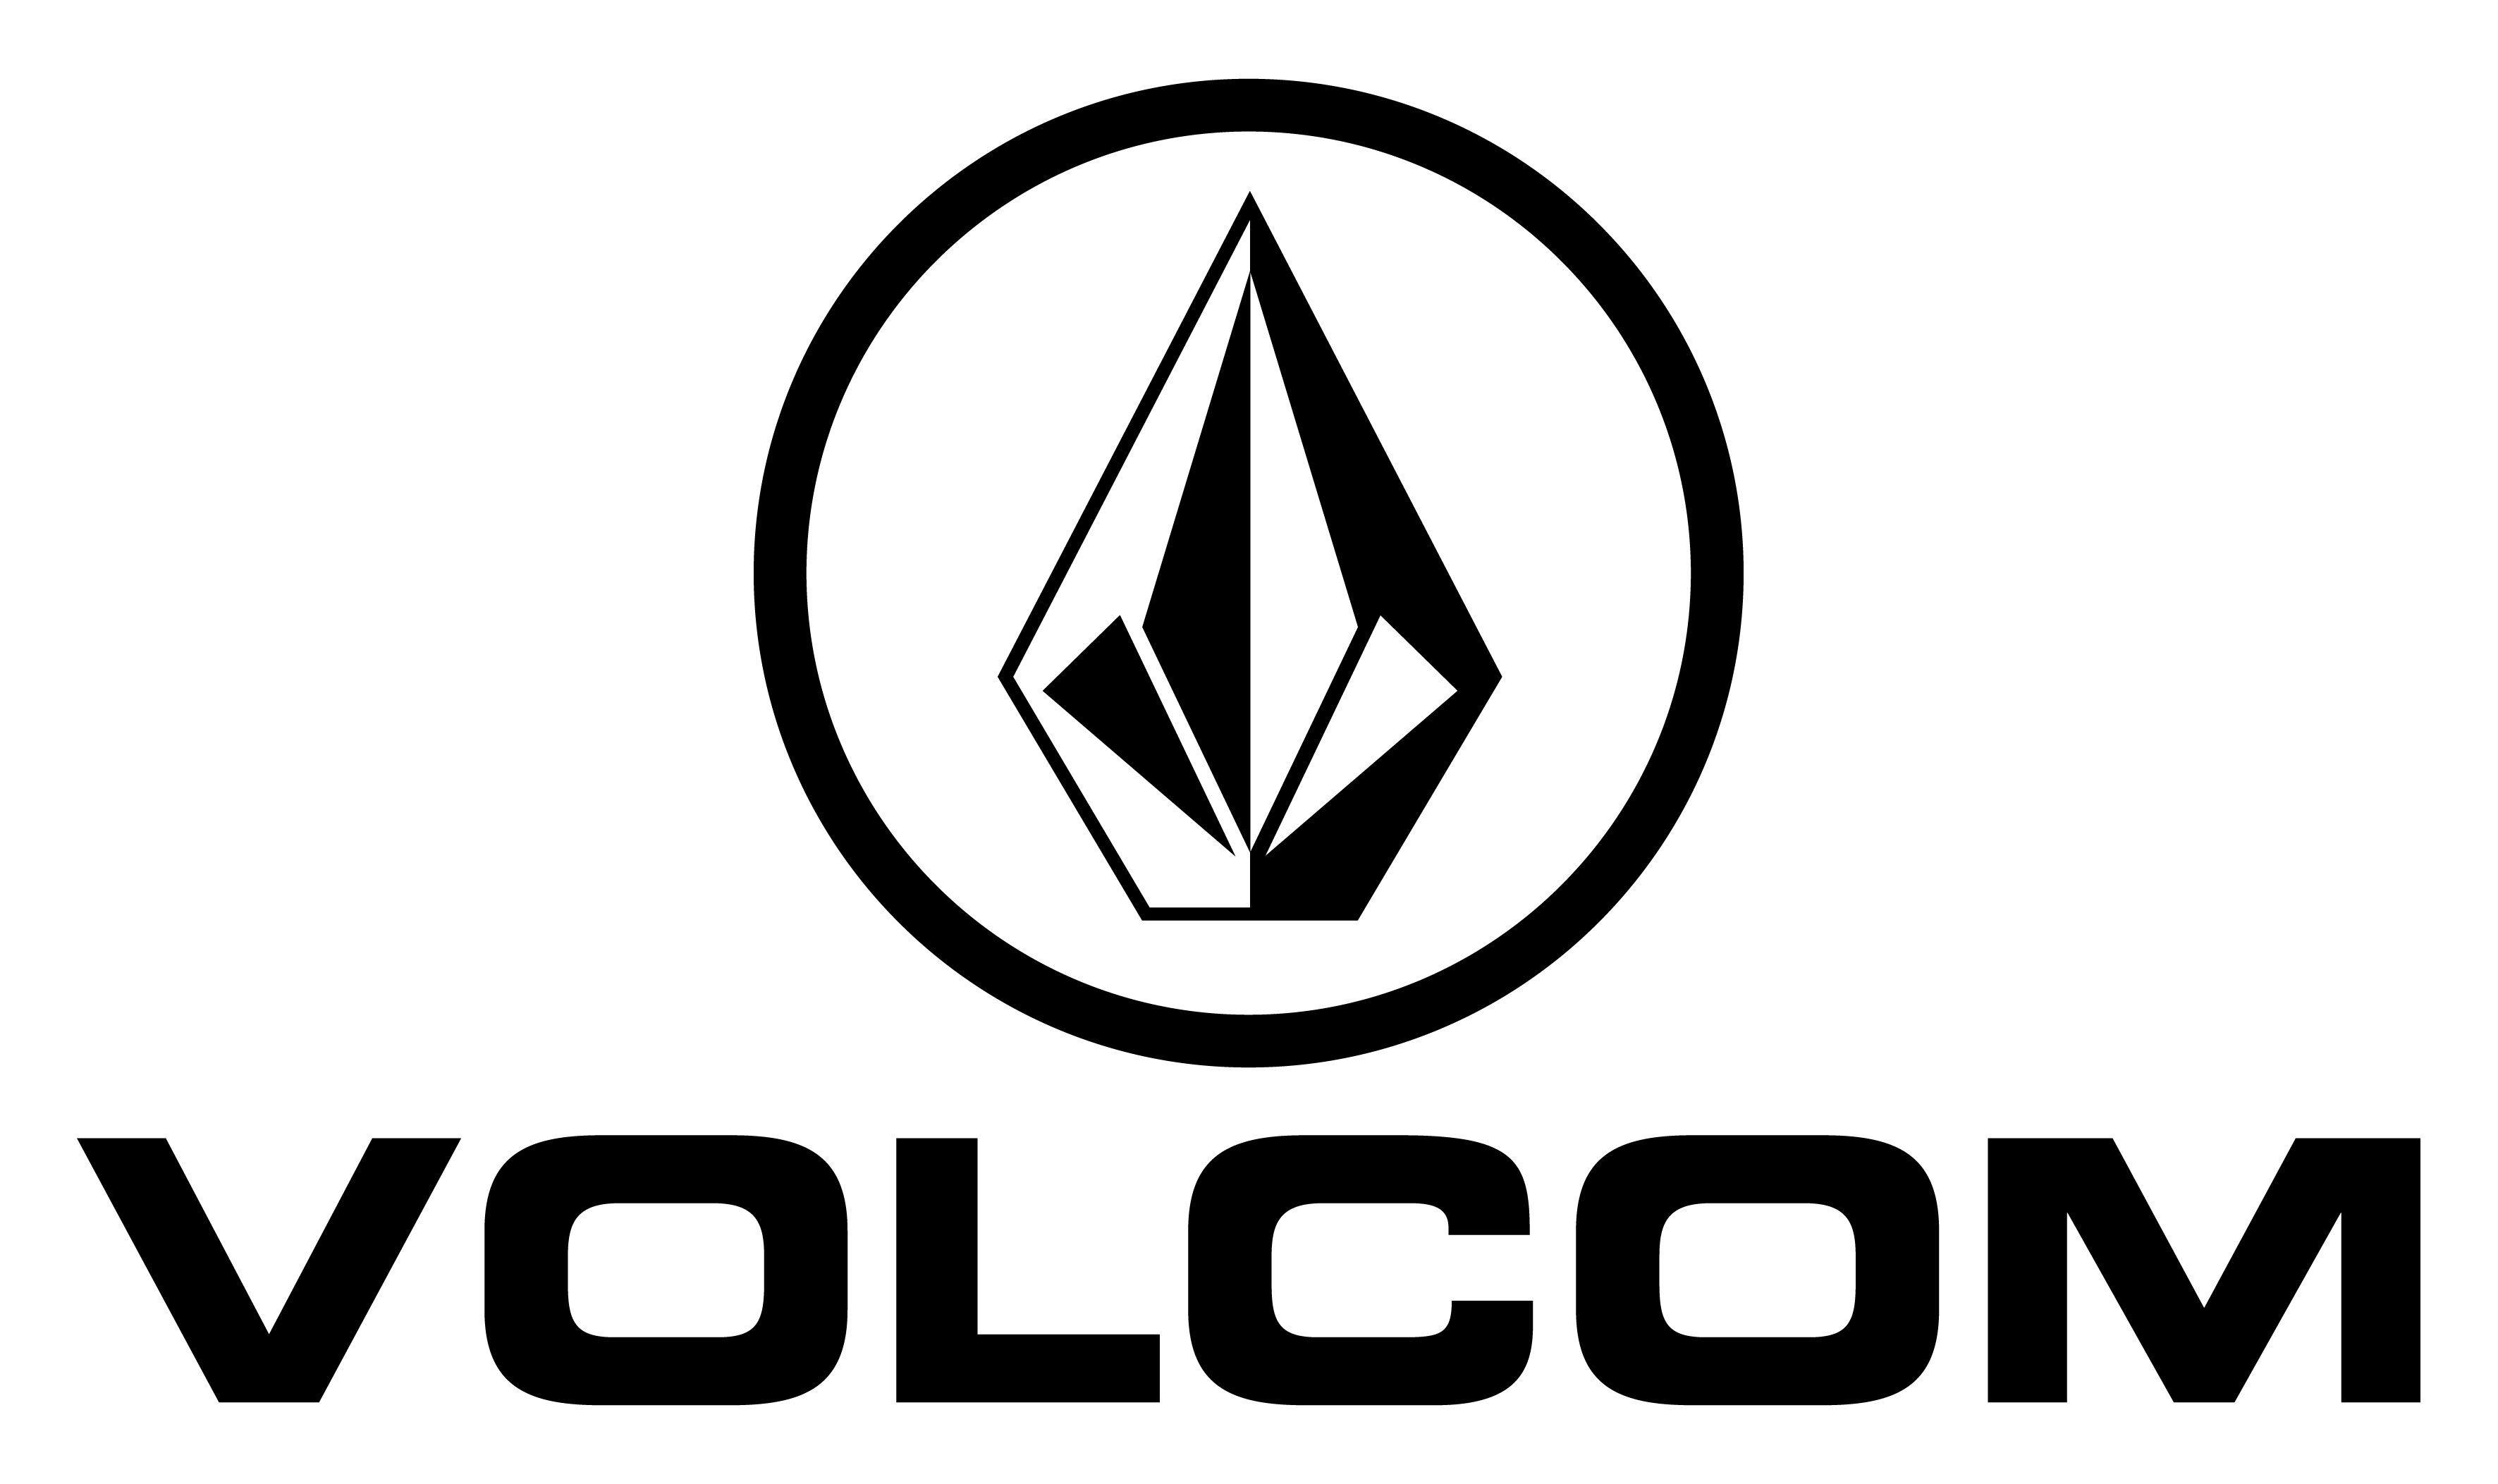 Volcom Logo HD Wallpaper Picture Background Image Collection